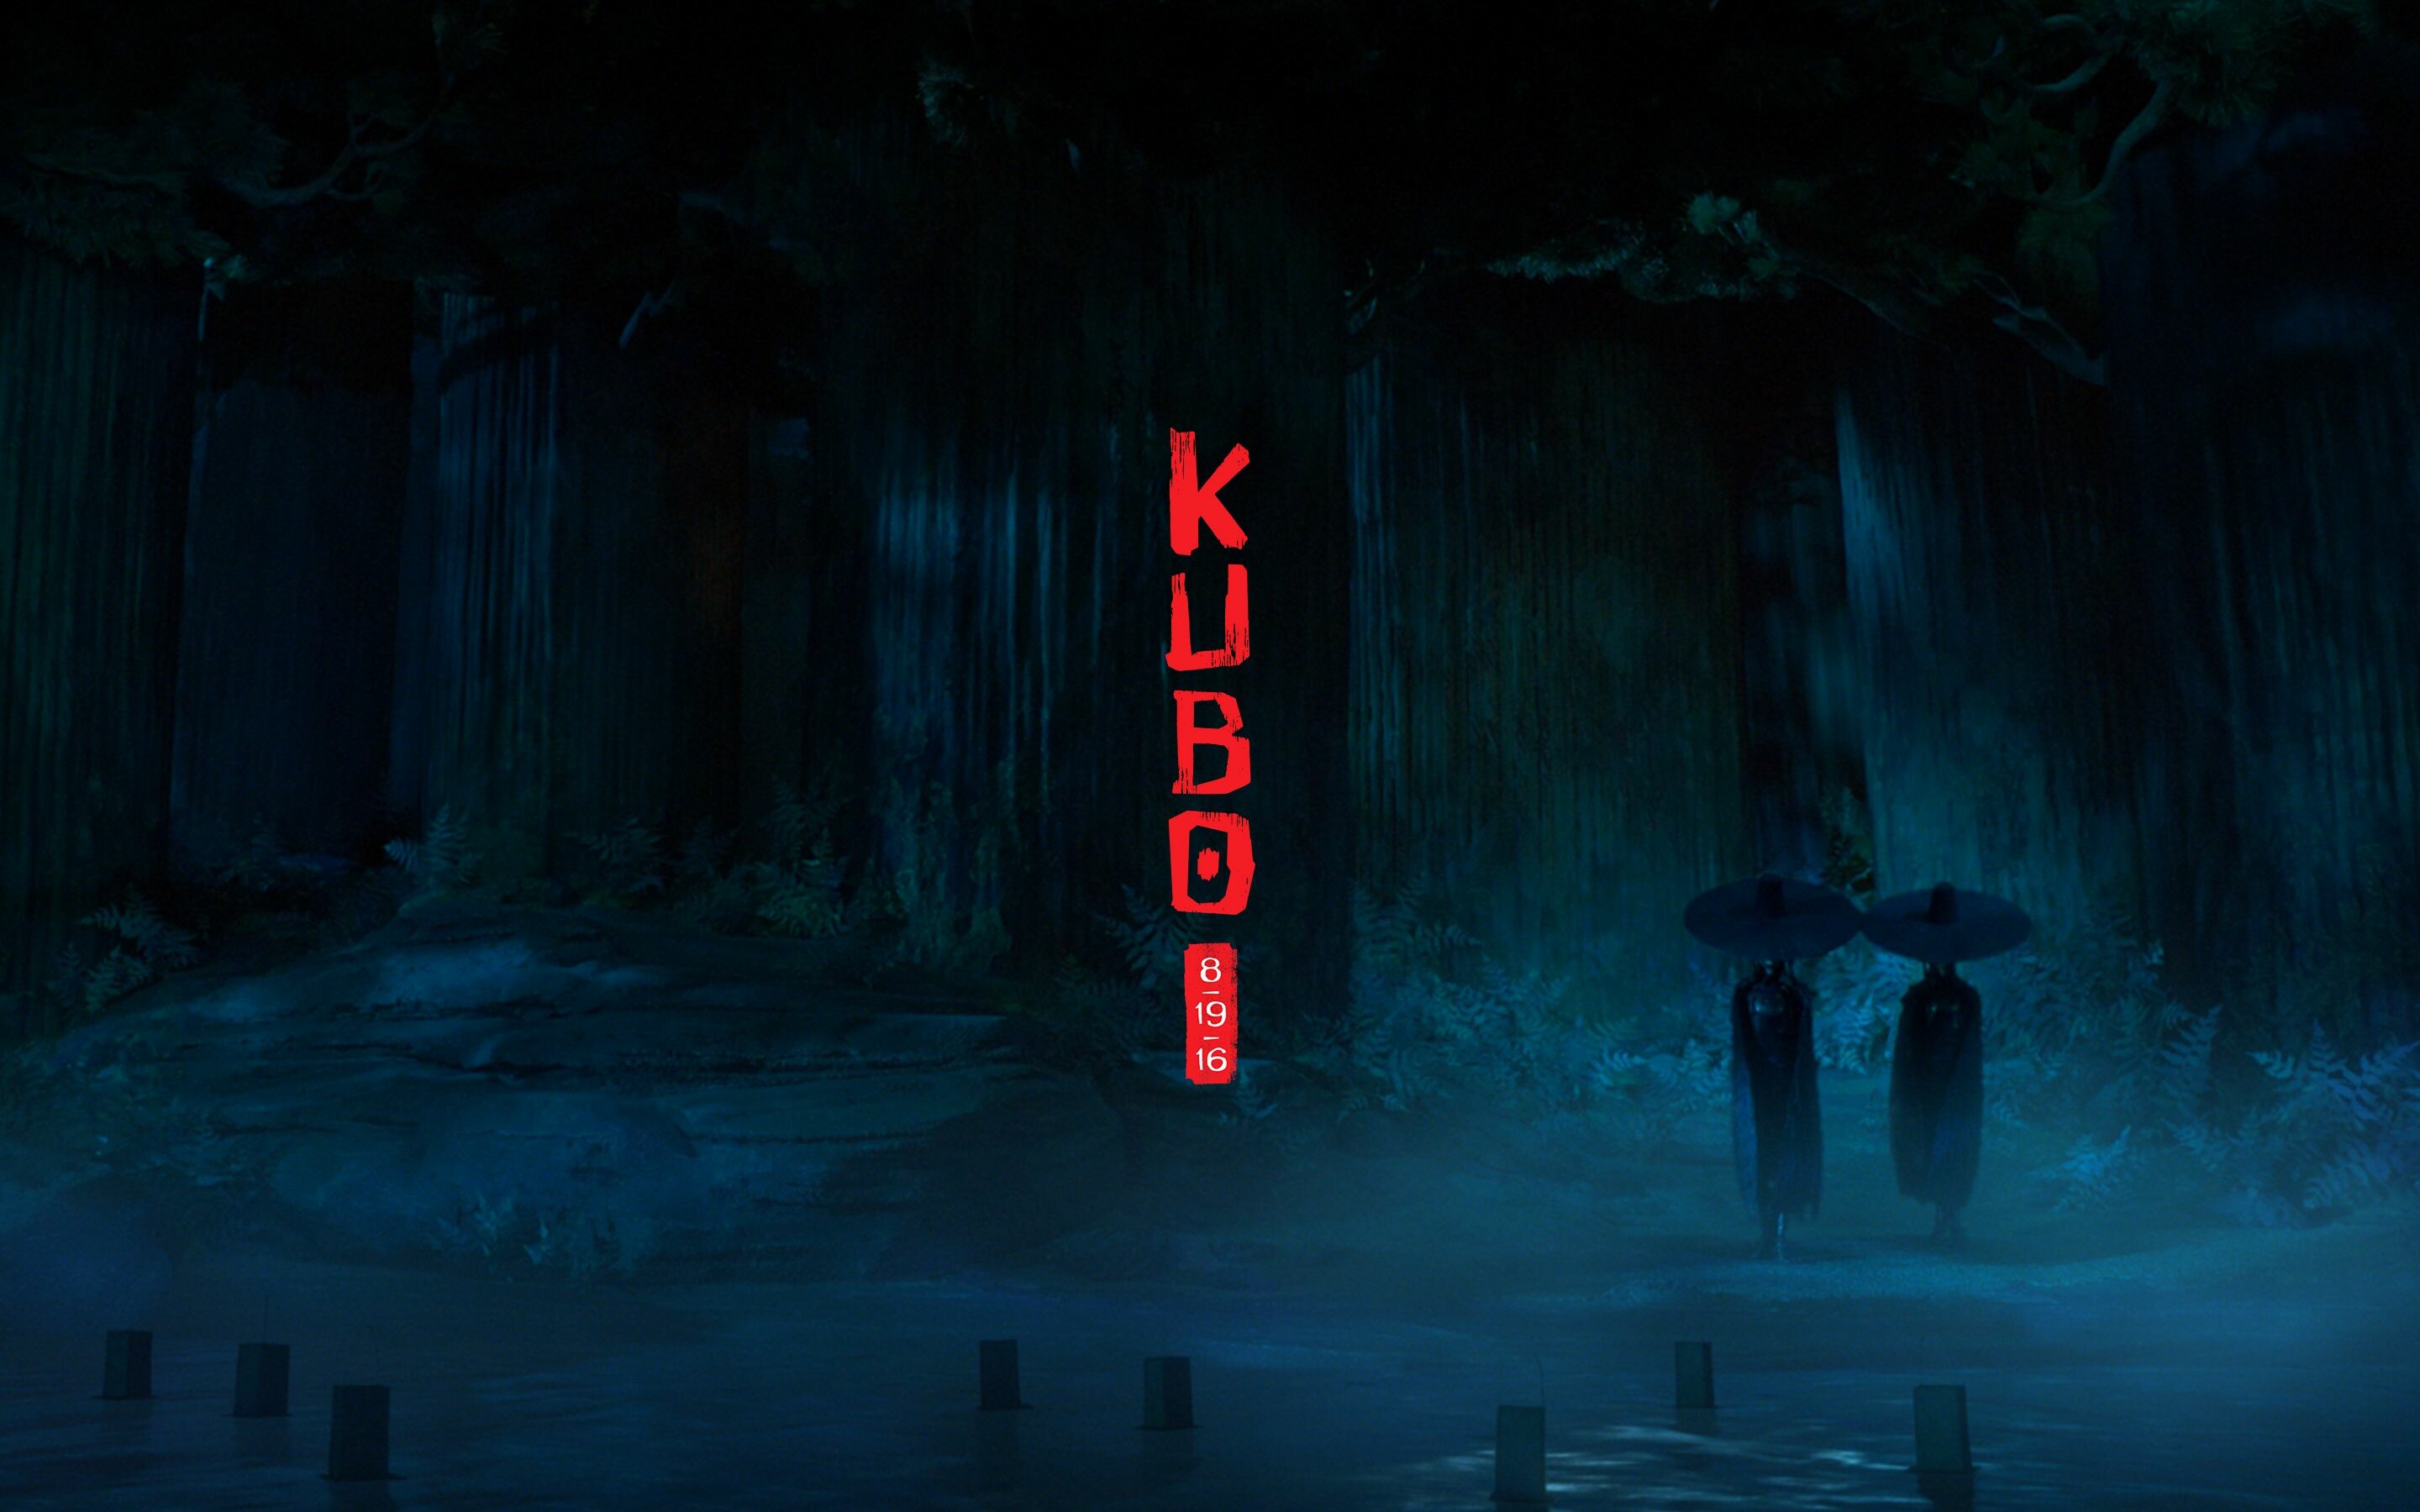 Kubo and the Two Strings: Animated adventure set in a mythical Japanese landscape. 2880x1800 HD Wallpaper.